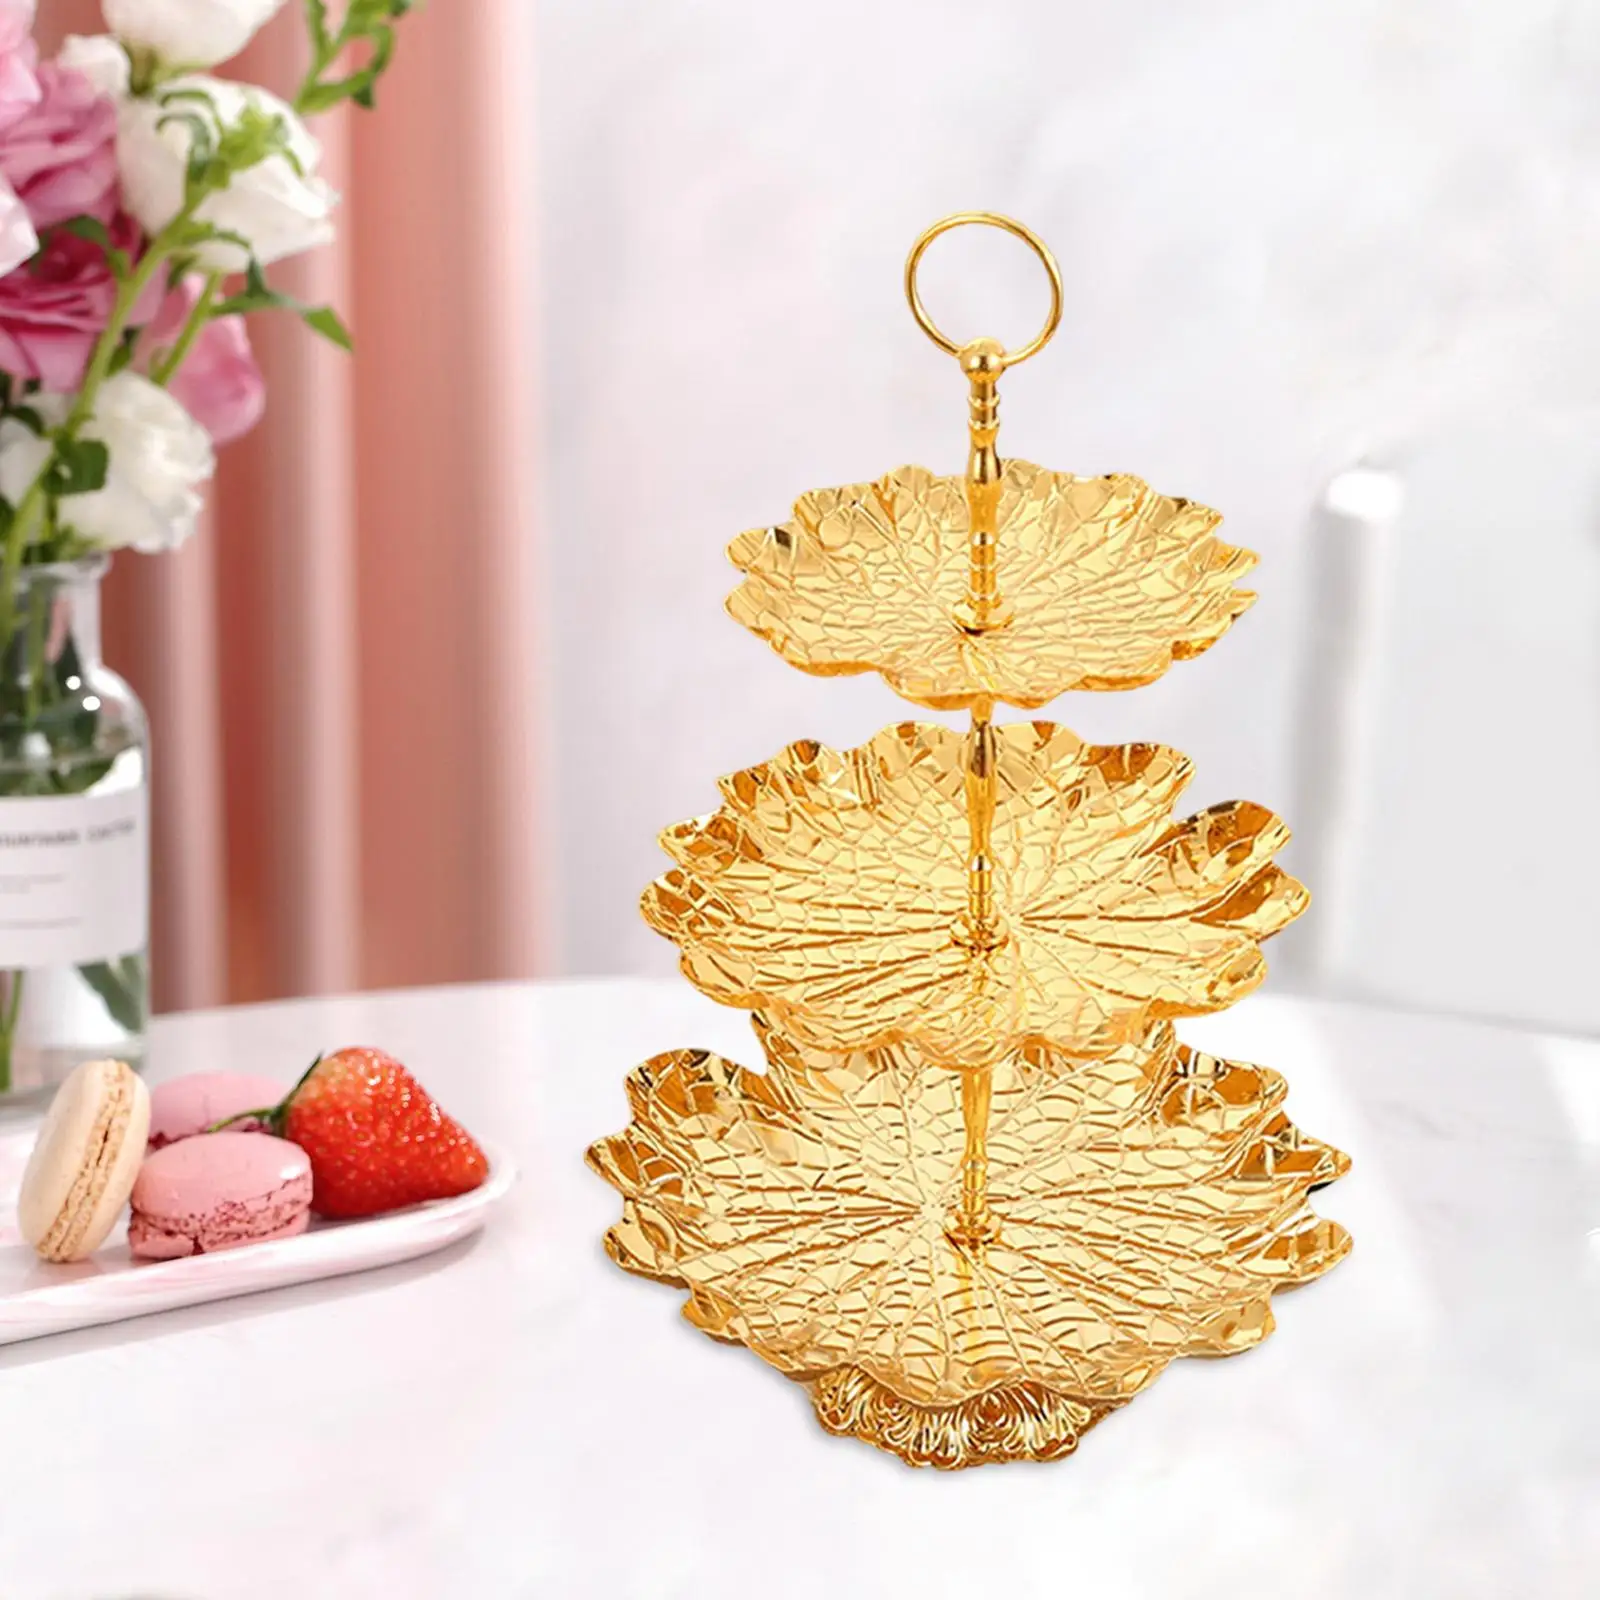 Metal Snack Buffet Display Tower Serving Tray Fruit Plate Cupcake Stand for Kitchen Desktop Countertop Birthday Decoration